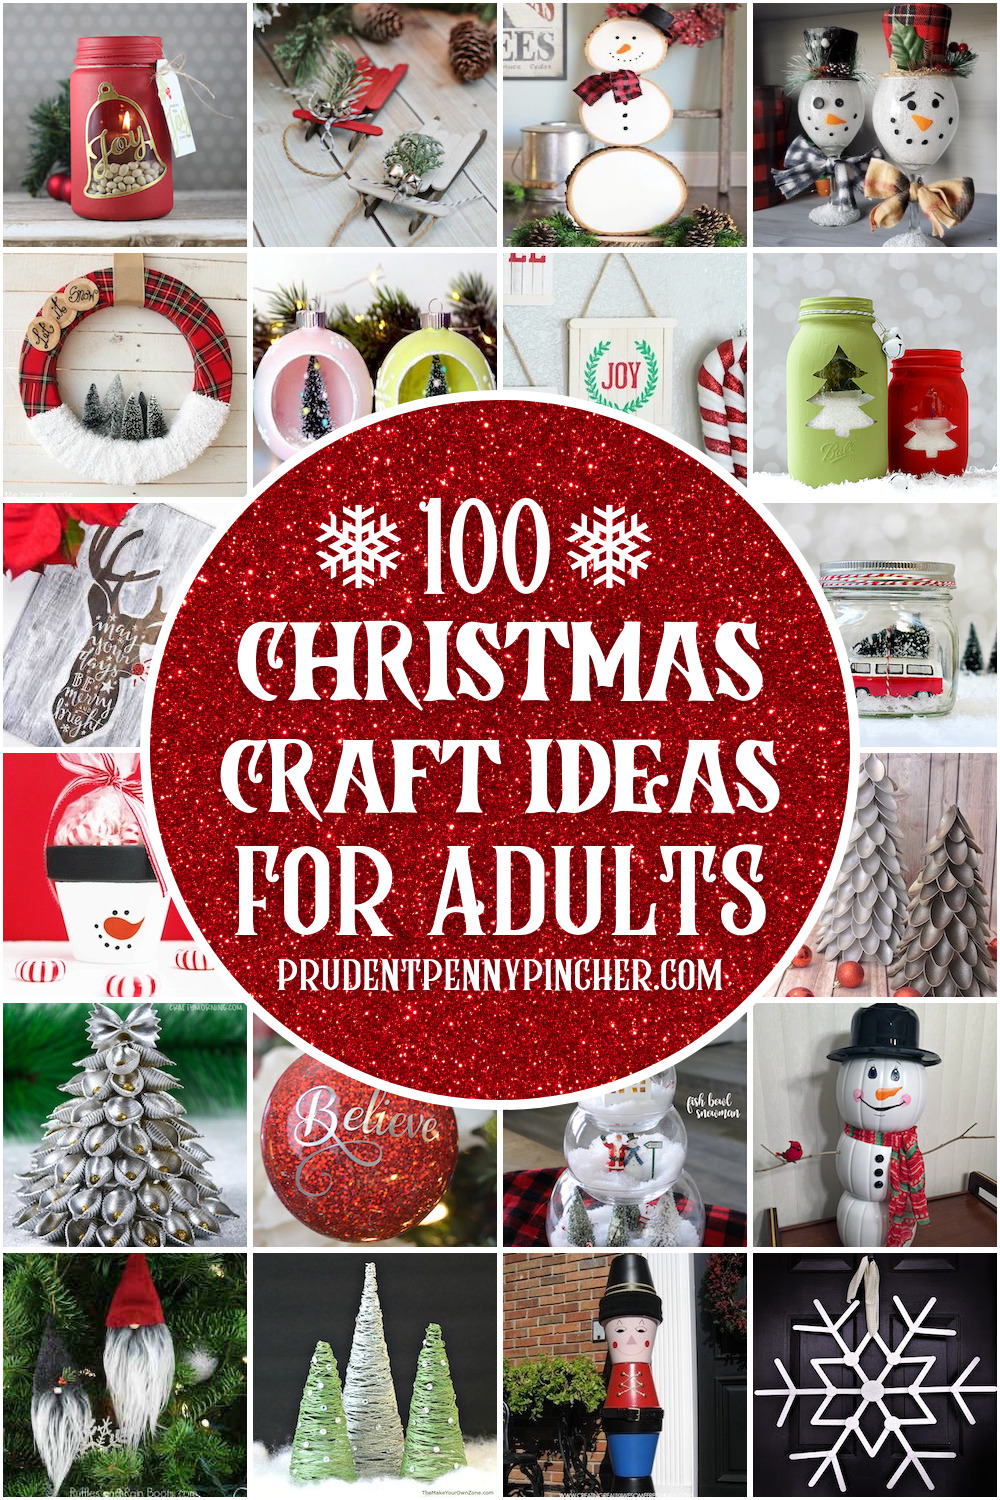 https://www.prudentpennypincher.com/wp-content/uploads/2020/11/christmas-crafts-for-adults.jpg